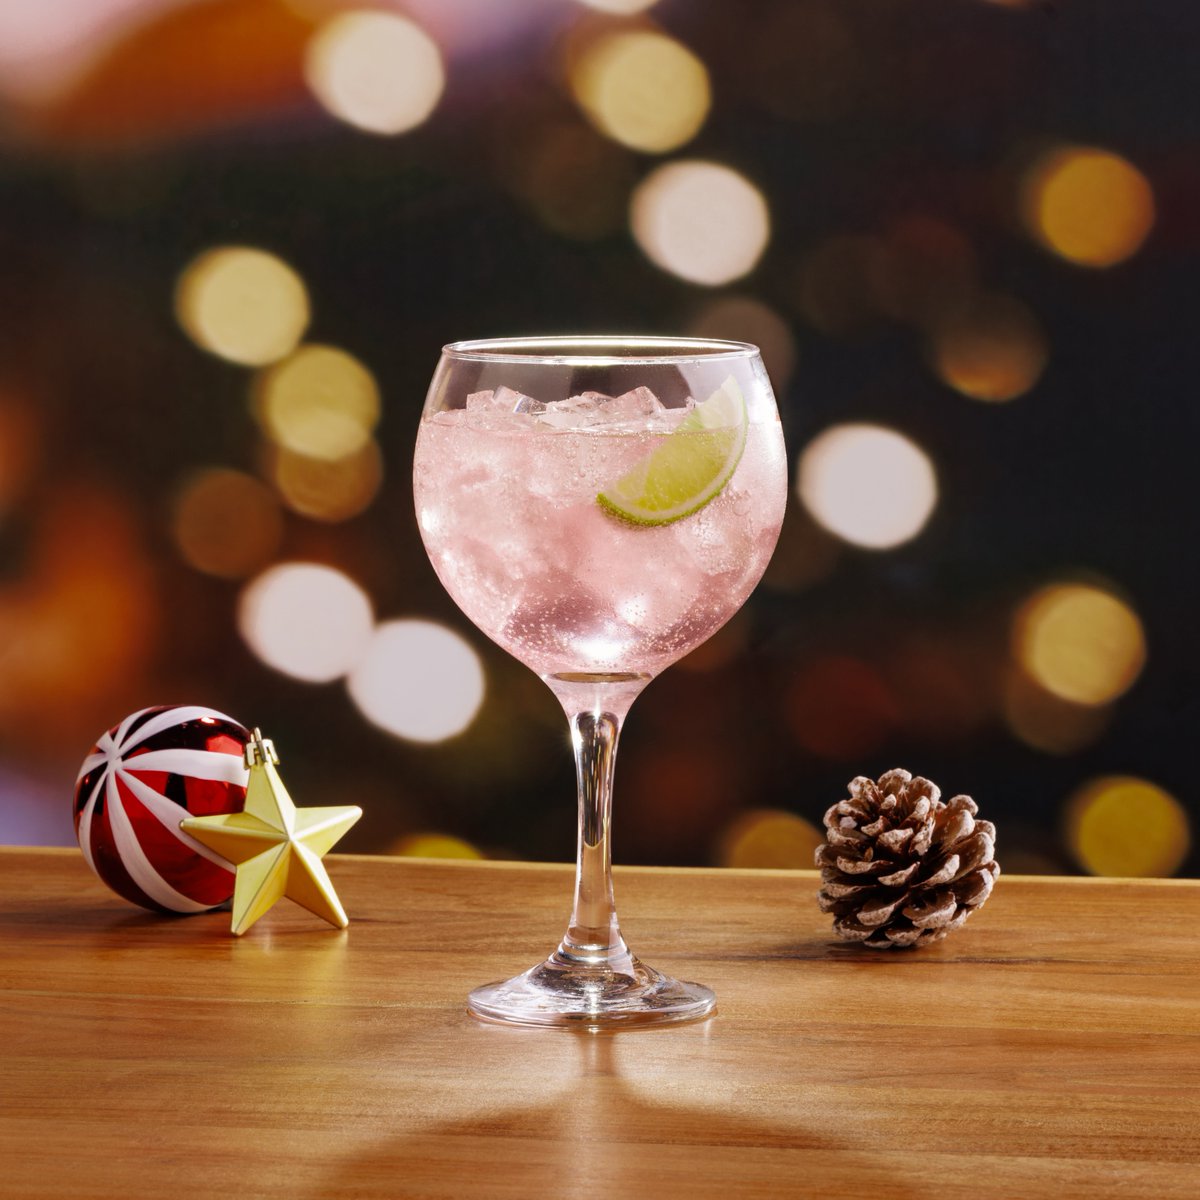 Raise a glass to festive cheer 🥂 From mocktails to cocktails, lager to ales… we’ve got something for everyone. What are you choosing? #HungryHorse #FestiveDrinks #Christmas #PubGrub #EPIC